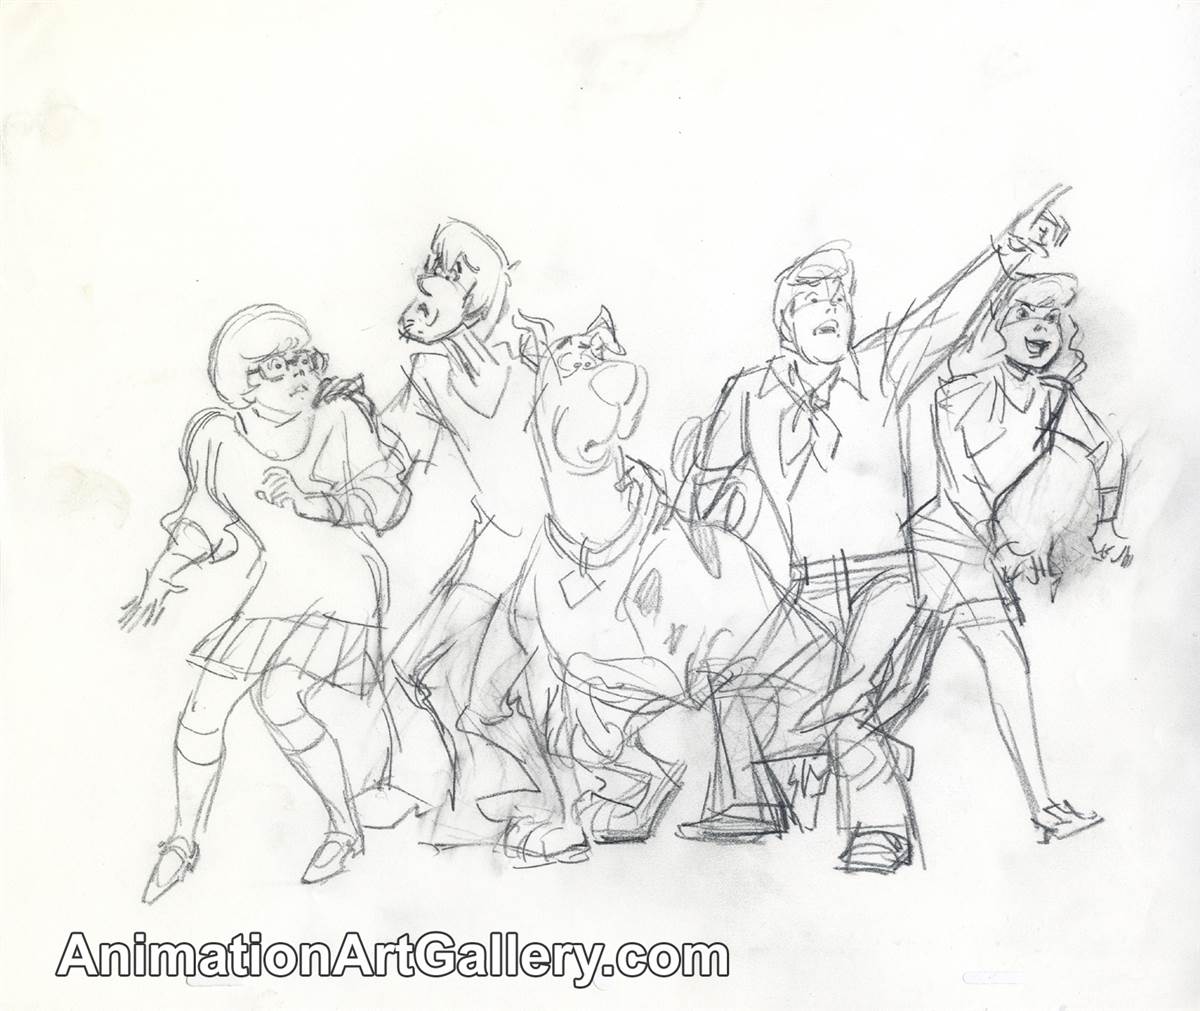 Scooby Doo Drawing Original by Davids-Place on DeviantArt